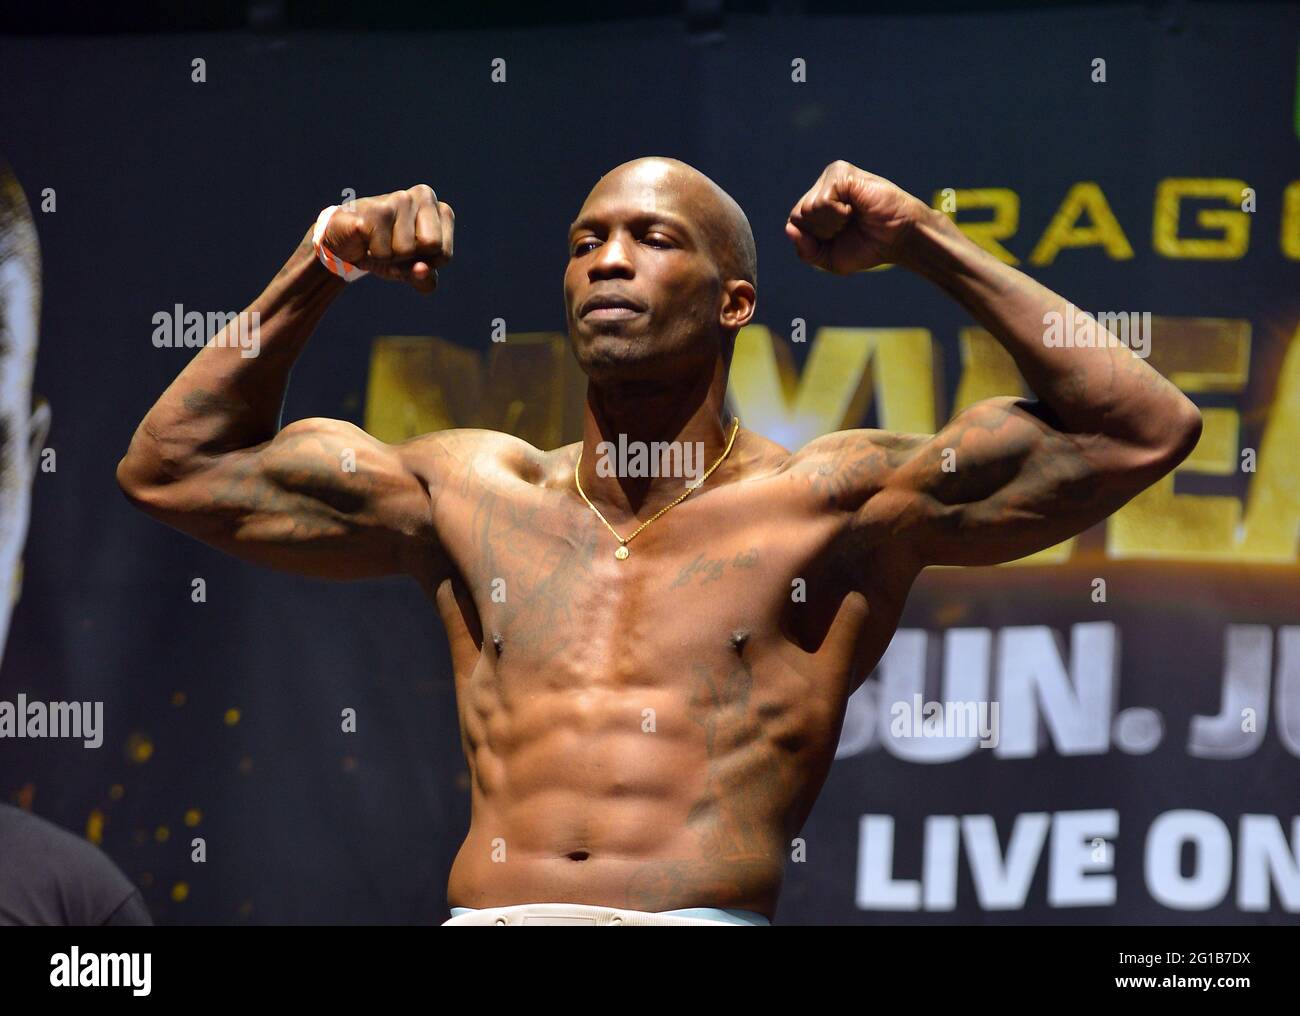 Chad Johnson poses for photographers during a weigh-in Saturday